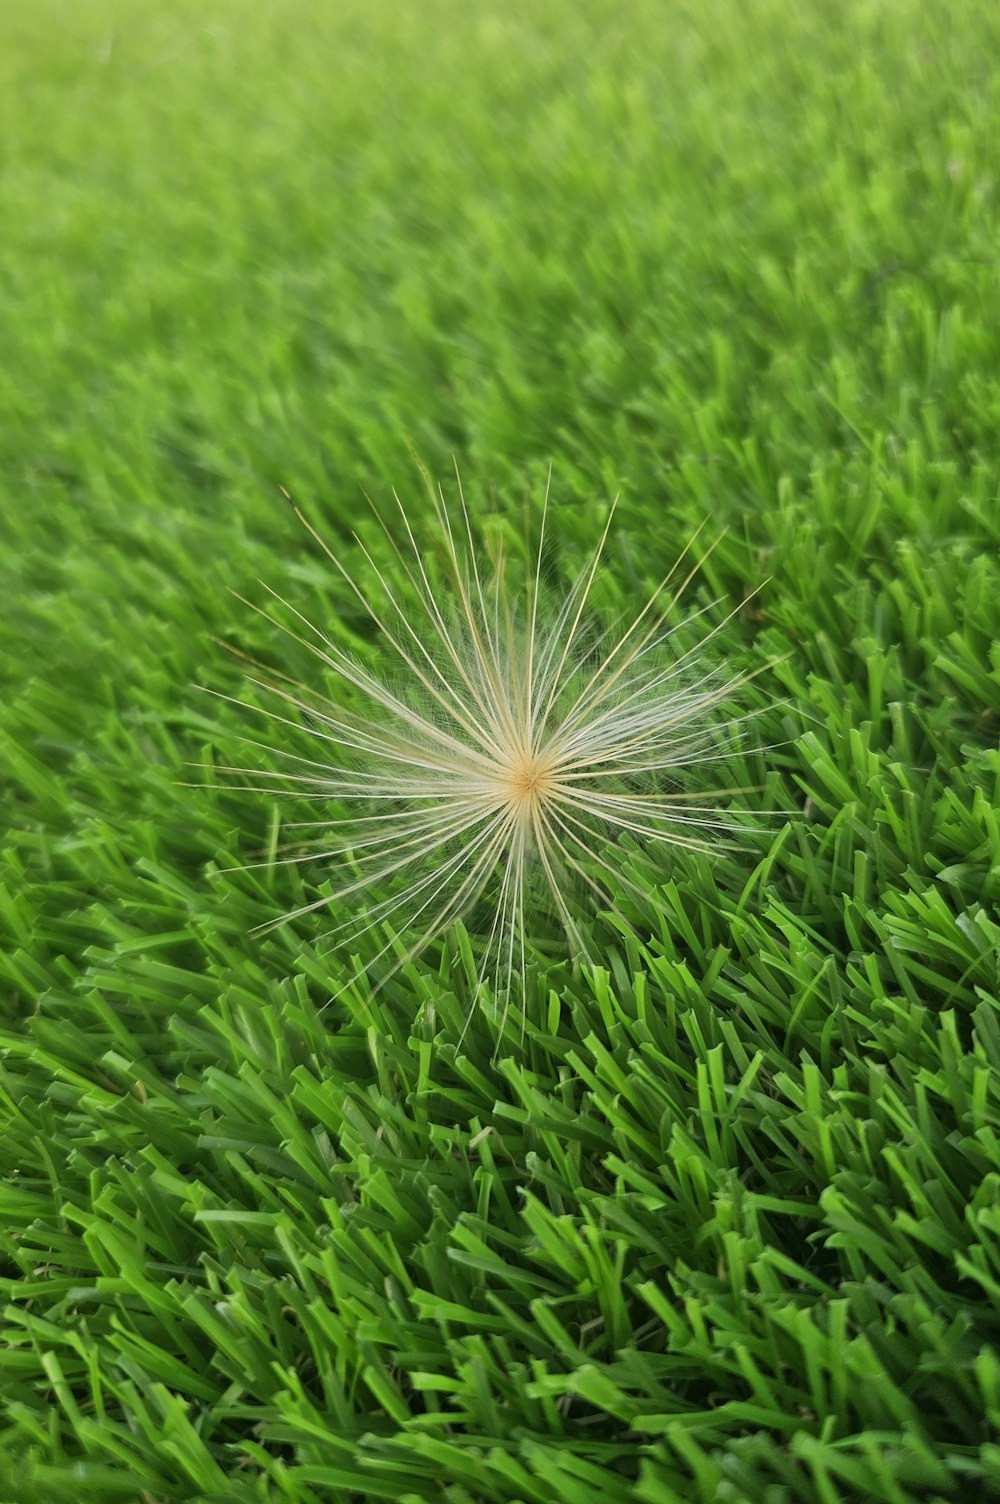 a dandelion in the middle of some green grass